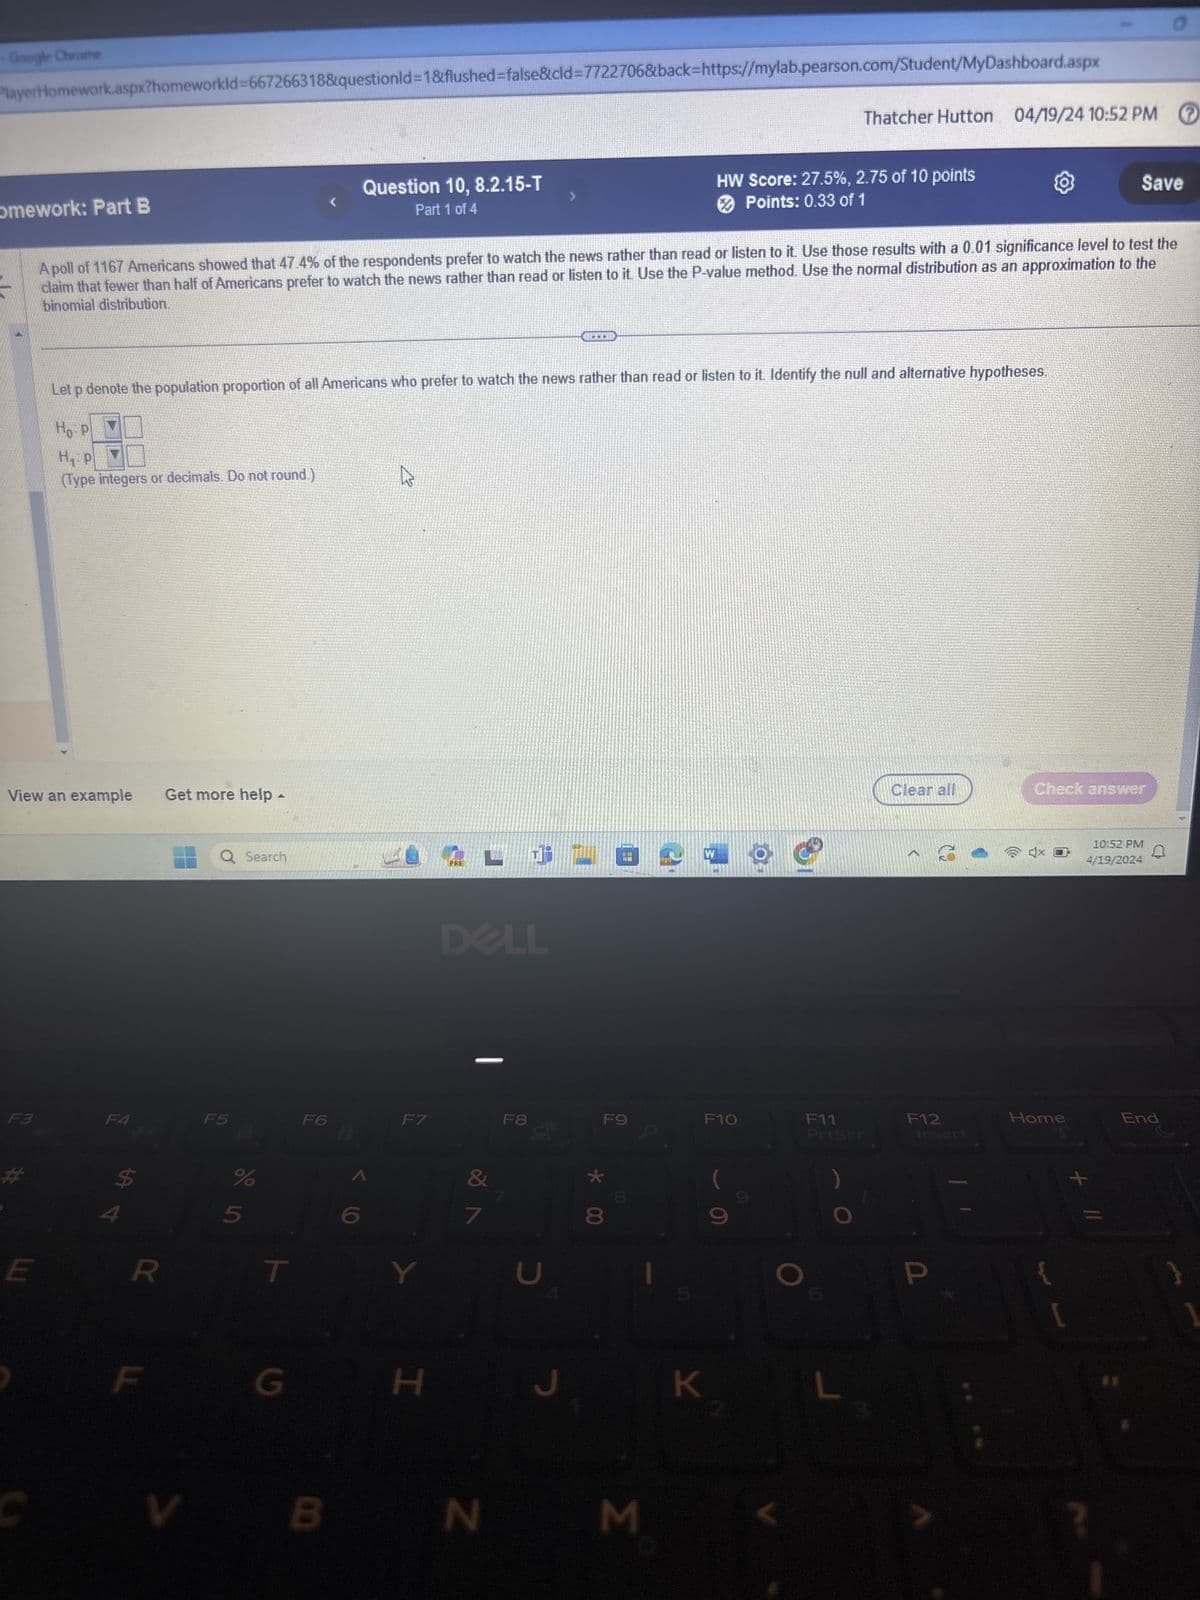 Google Chrome
PlayerHomework.aspx?homeworkId=667266318&questionId=1&flushed=false&cid=7722706&back=https://mylab.pearson.com/Student/MyDashboard.aspx
omework: Part B
Question 10, 8.2.15-T
Part 1 of 4
Thatcher Hutton 04/19/24 10:52 PM ⑦
HW Score: 27.5%, 2.75 of 10 points
Points: 0.33 of 1
Save
A poll of 1167 Americans showed that 47.4% of the respondents prefer to watch the news rather than read or listen to it. Use those results with a 0.01 significance level to test the
claim that fewer than half of Americans prefer to watch the news rather than read or listen to it. Use the P-value method. Use the normal distribution as an approximation to the
binomial distribution.
Let p denote the population proportion of all Americans who prefer to watch the news rather than read or listen to it. Identify the null and alternative hypotheses.
Ho P
H₁ P
(Type integers or decimals. Do not round.)
View an example Get more help -
Q Search
F6
F5
3
F4
E
94
55
DELL
F7
F8
Y
7
כ
*
R
T
G
H
د
W
Clear all
Check answer
10:52 PM
4/19/2024
D
F9
F10
F11
Priser
F12
Insert
Home
End
V
B
N
M
O
+
K
L
?